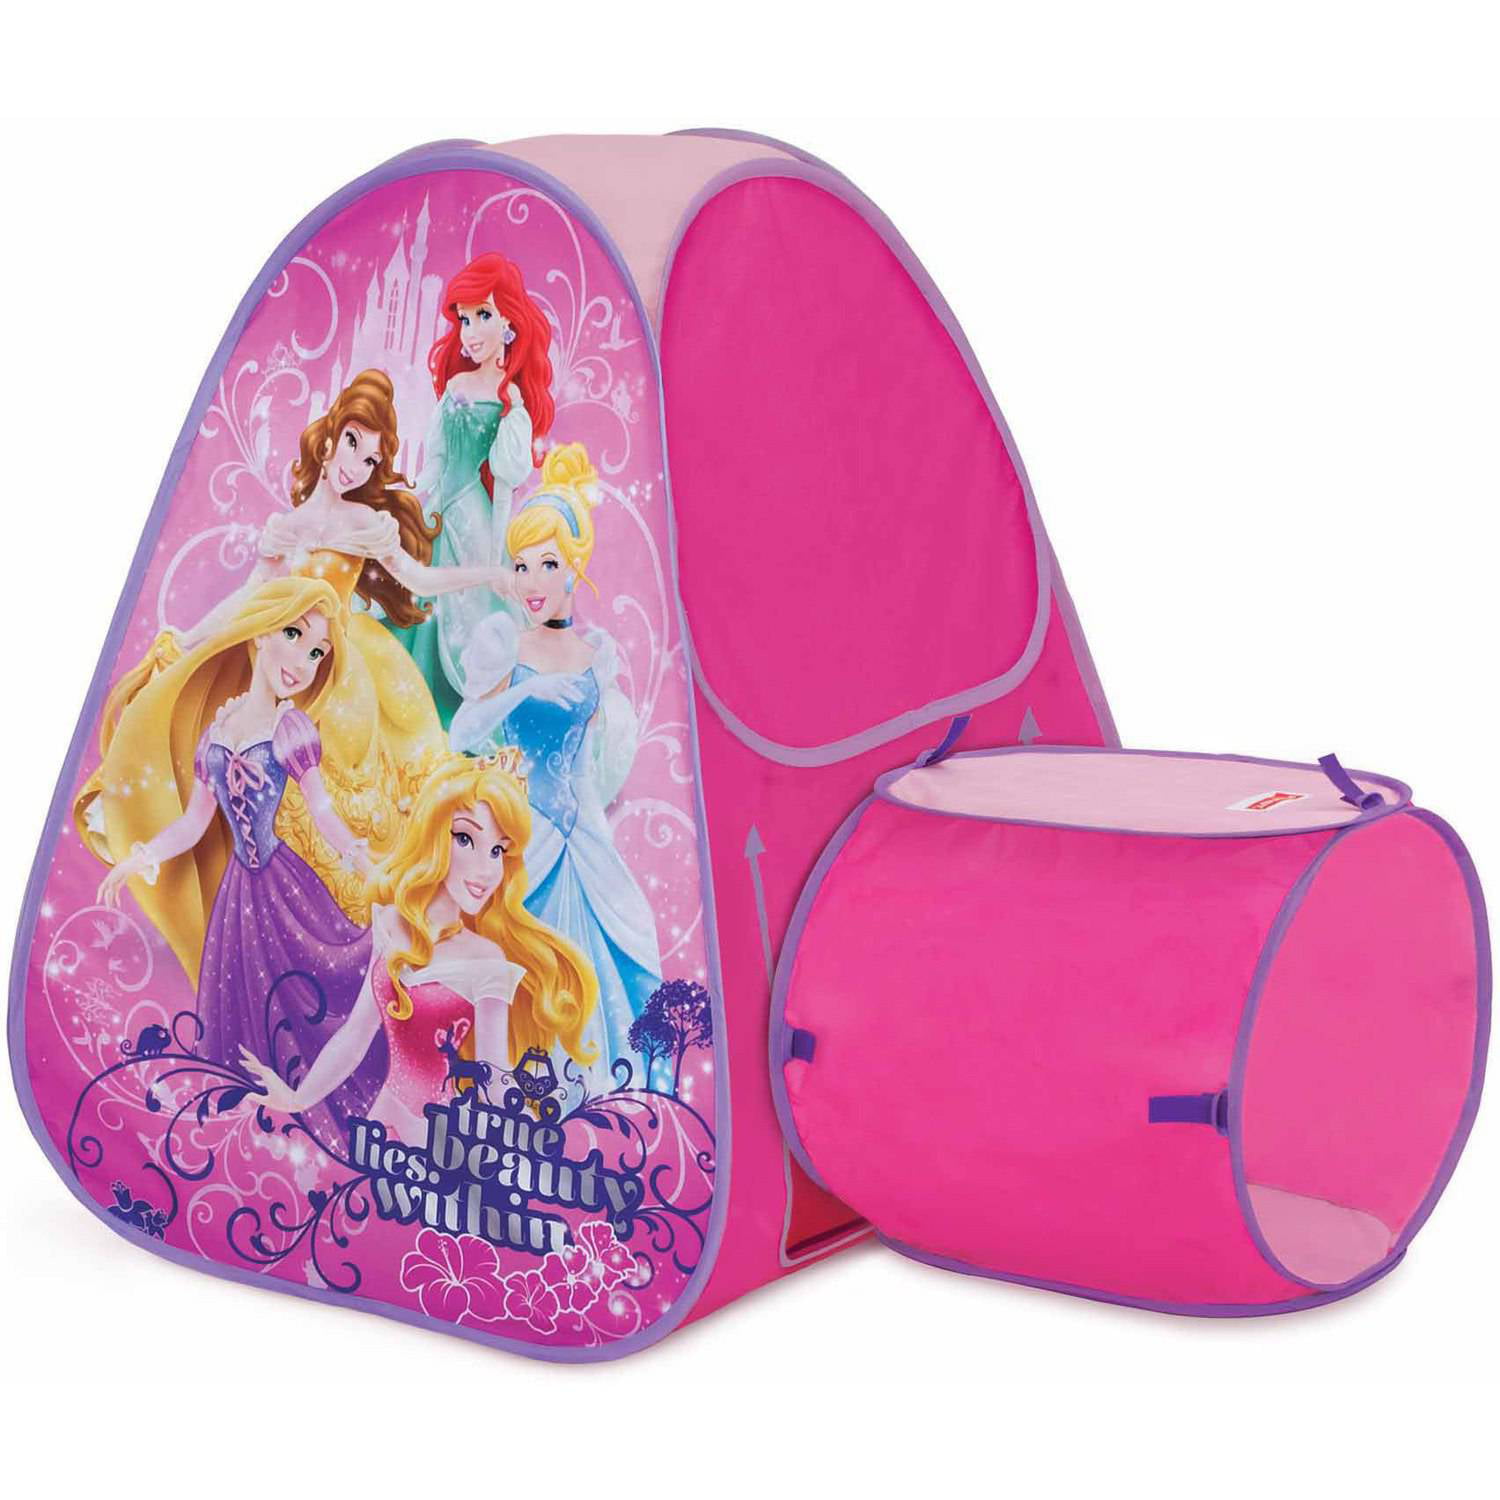 Playhut Disney Princess Hide About Tent and Tunnel Port